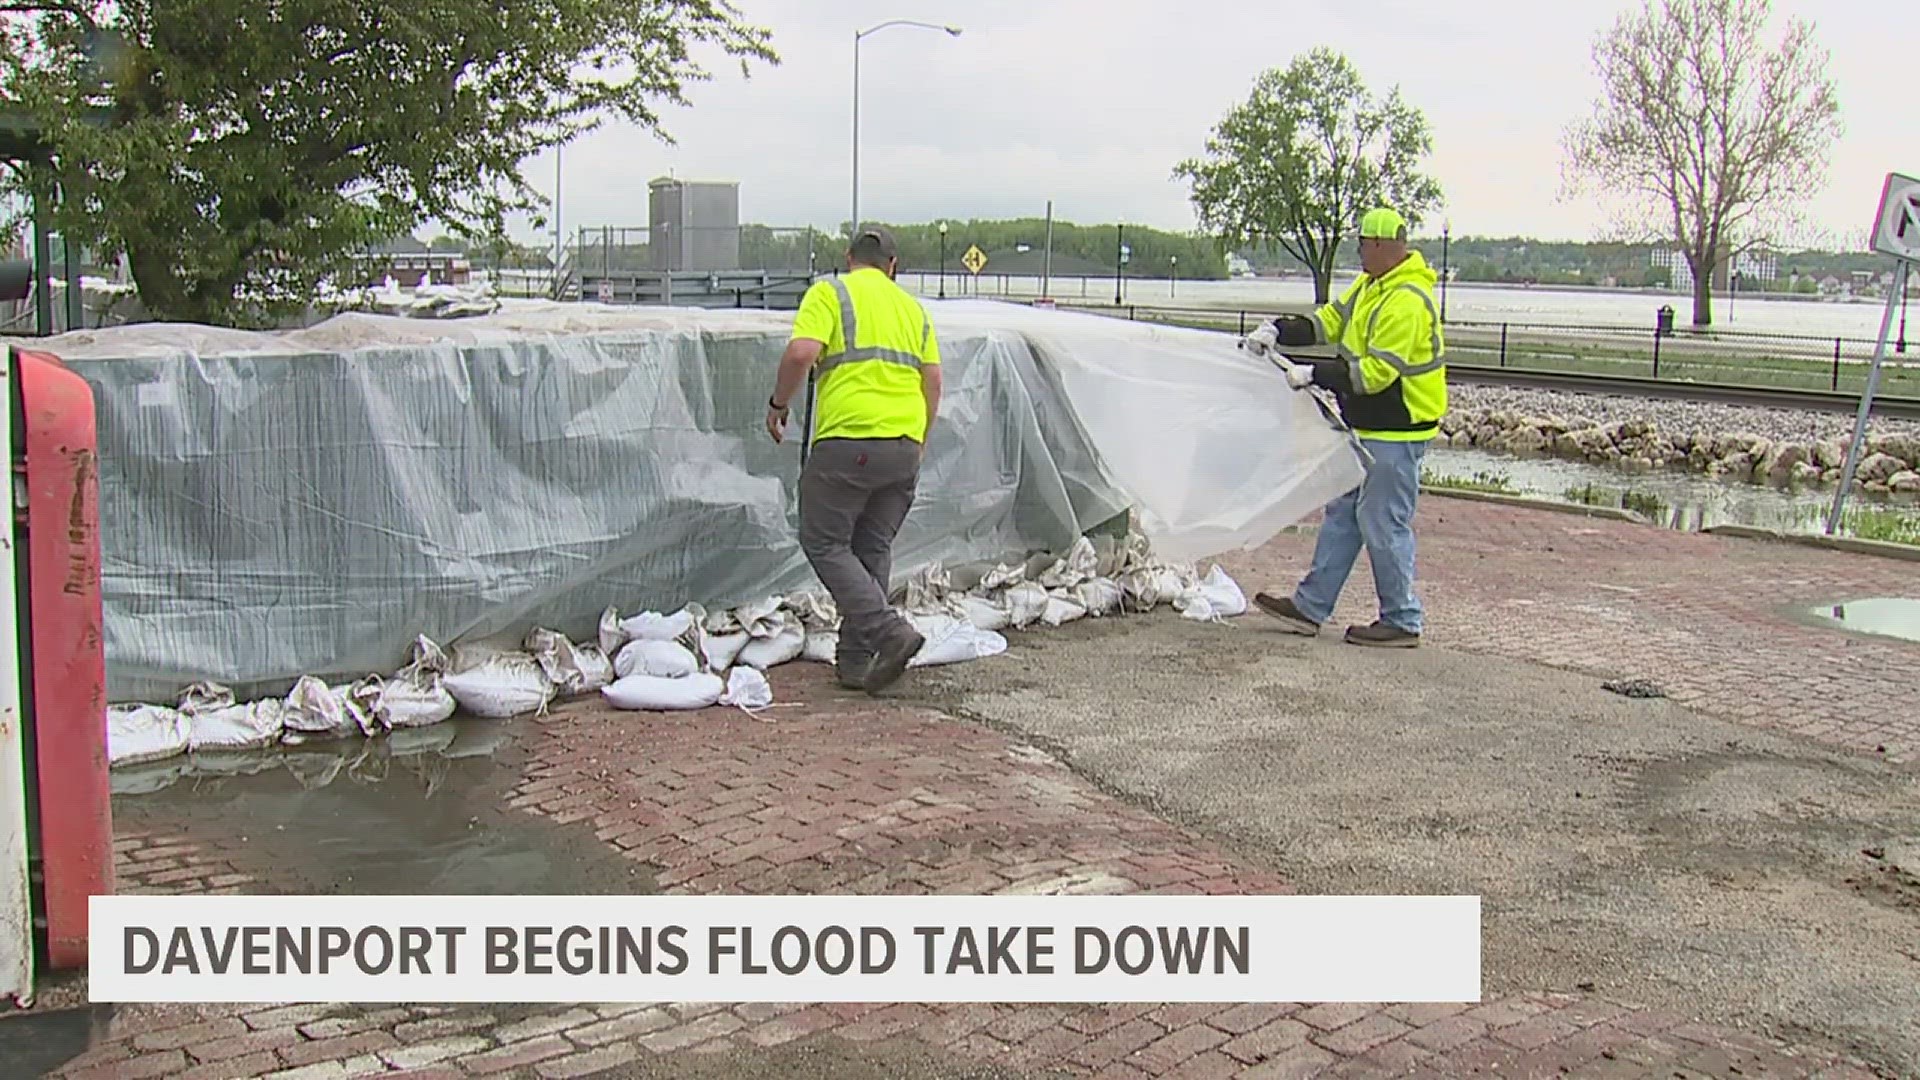 Bacteria are still the main concern with the flood waters. The City encourages residents and visitors to not walk in the water or along the remaining HESCO barriers.